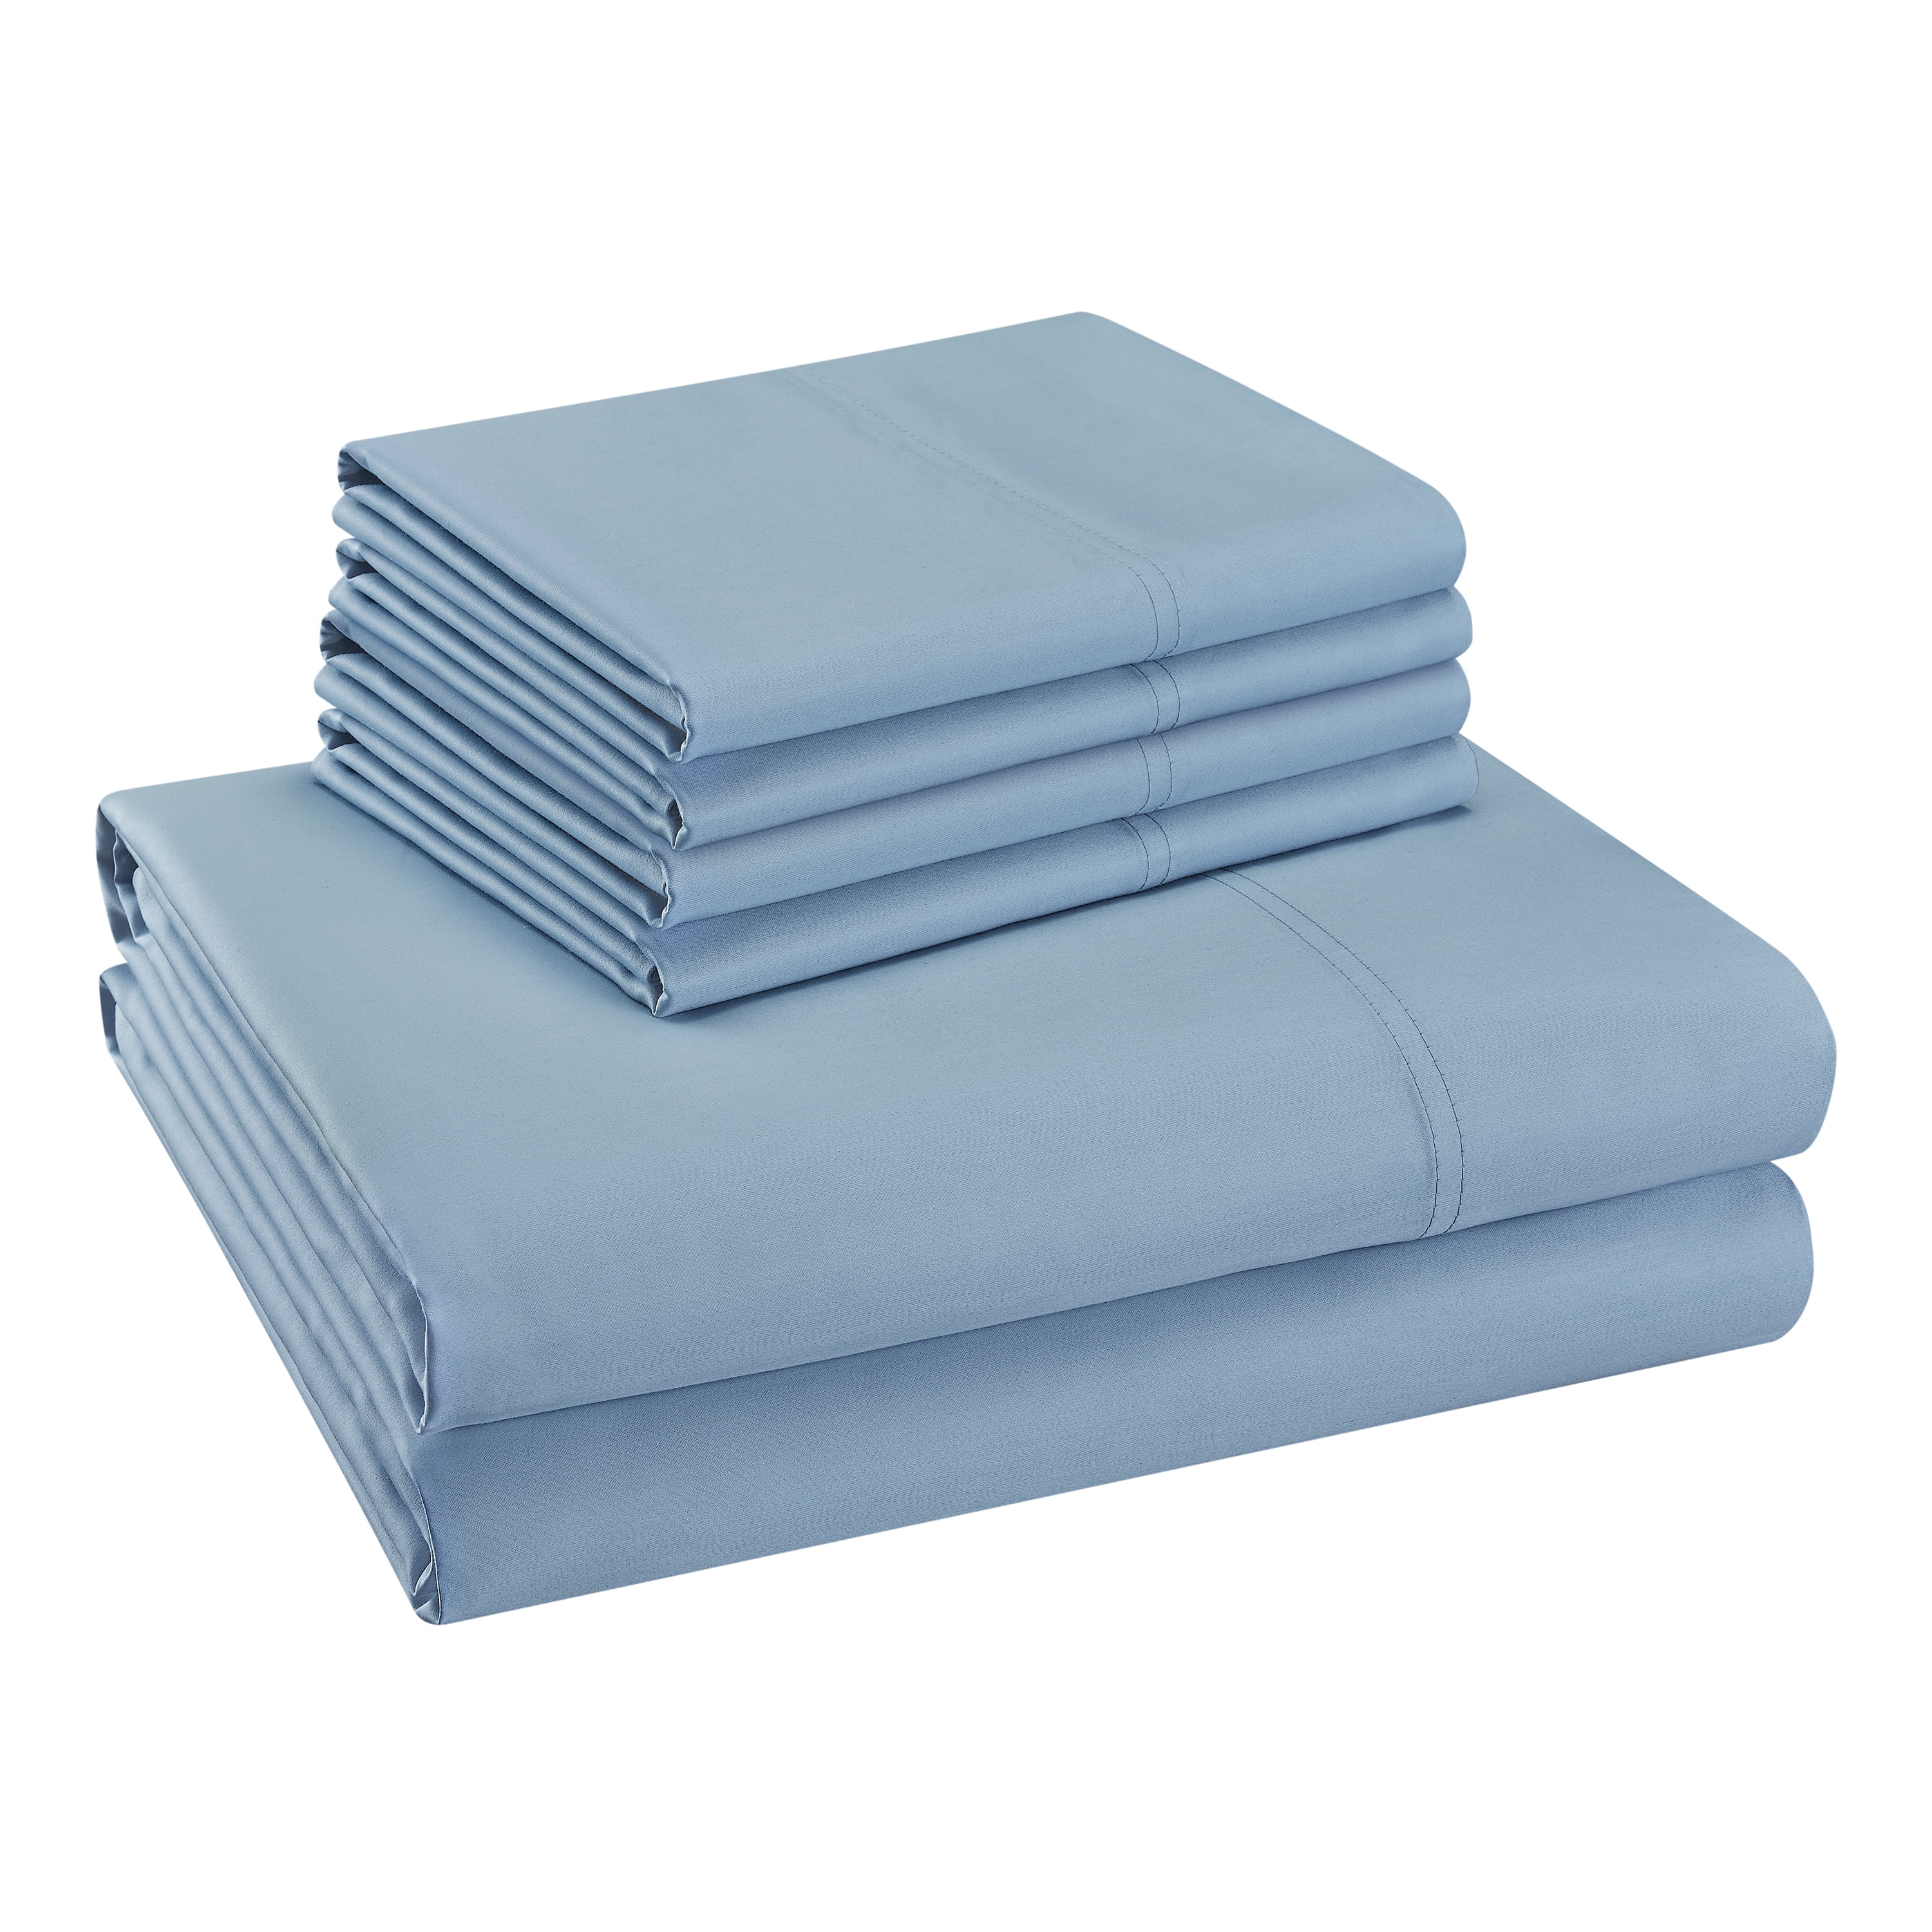 Hotel Style 800 Thread Count Cotton Rich Sateen Bed Sheet Set, Queen, Blue, Set of 6